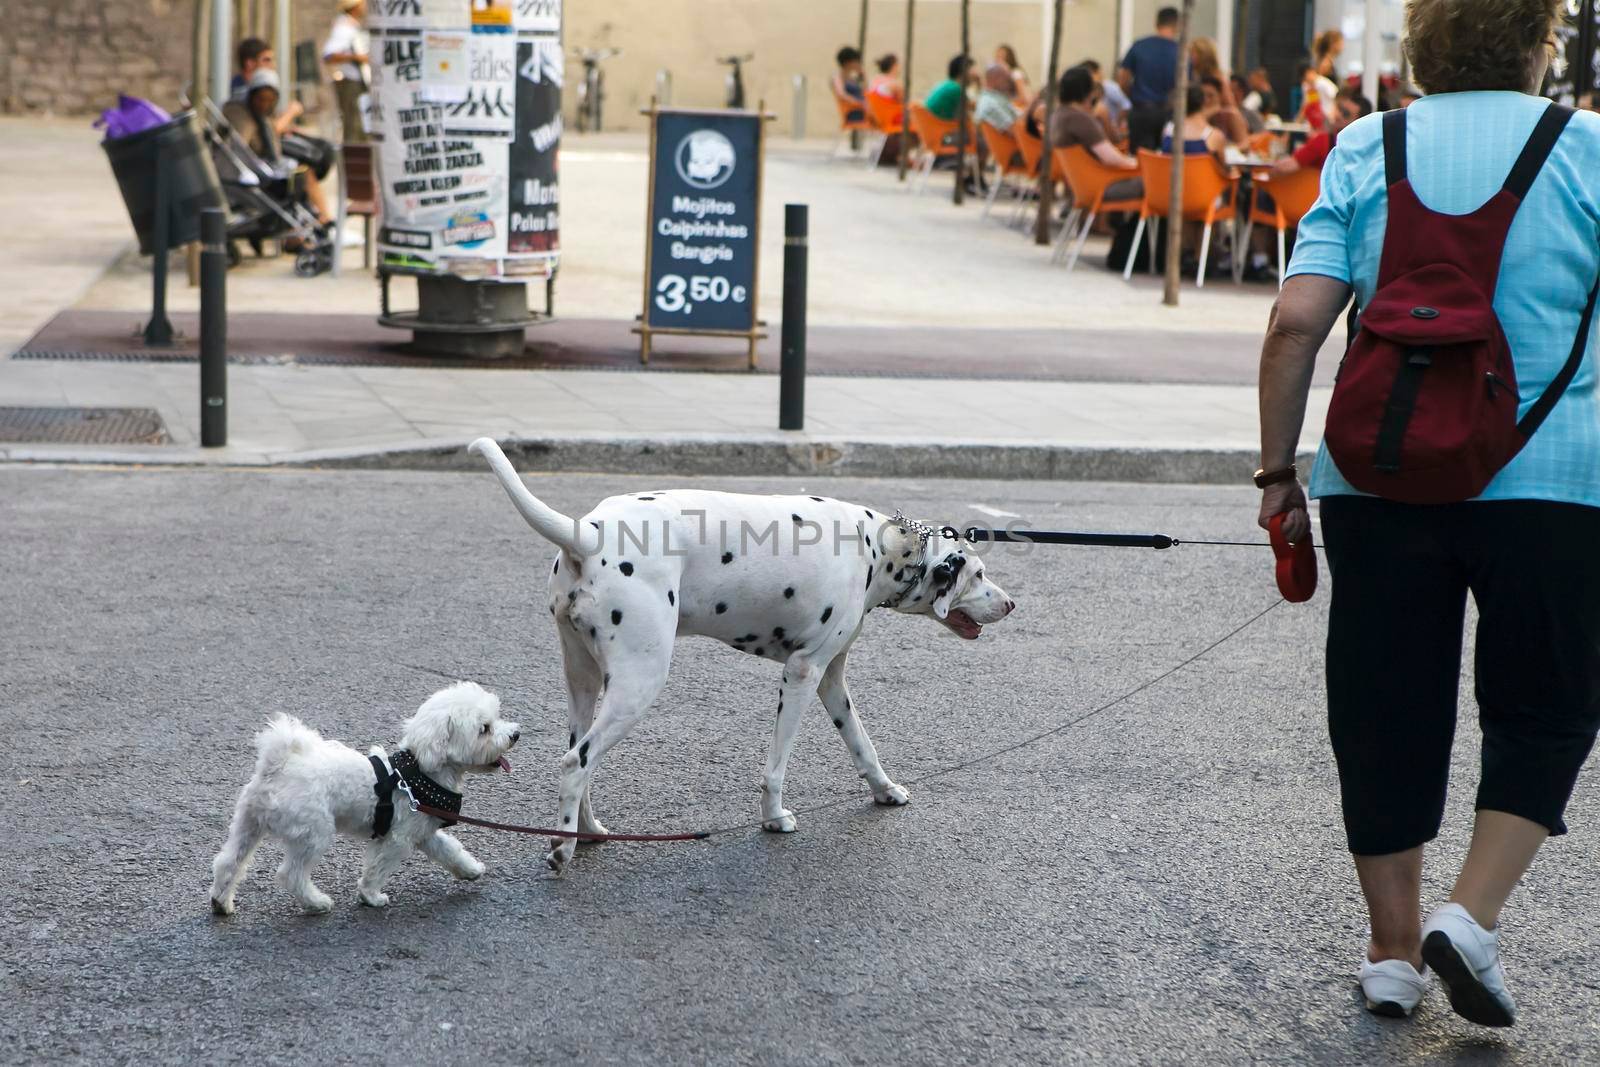 Blanes, Catalonia, Spain. - 25 July 2017, An elderly woman leads two dogs: a great dane and a lapdog on a leash for a walk